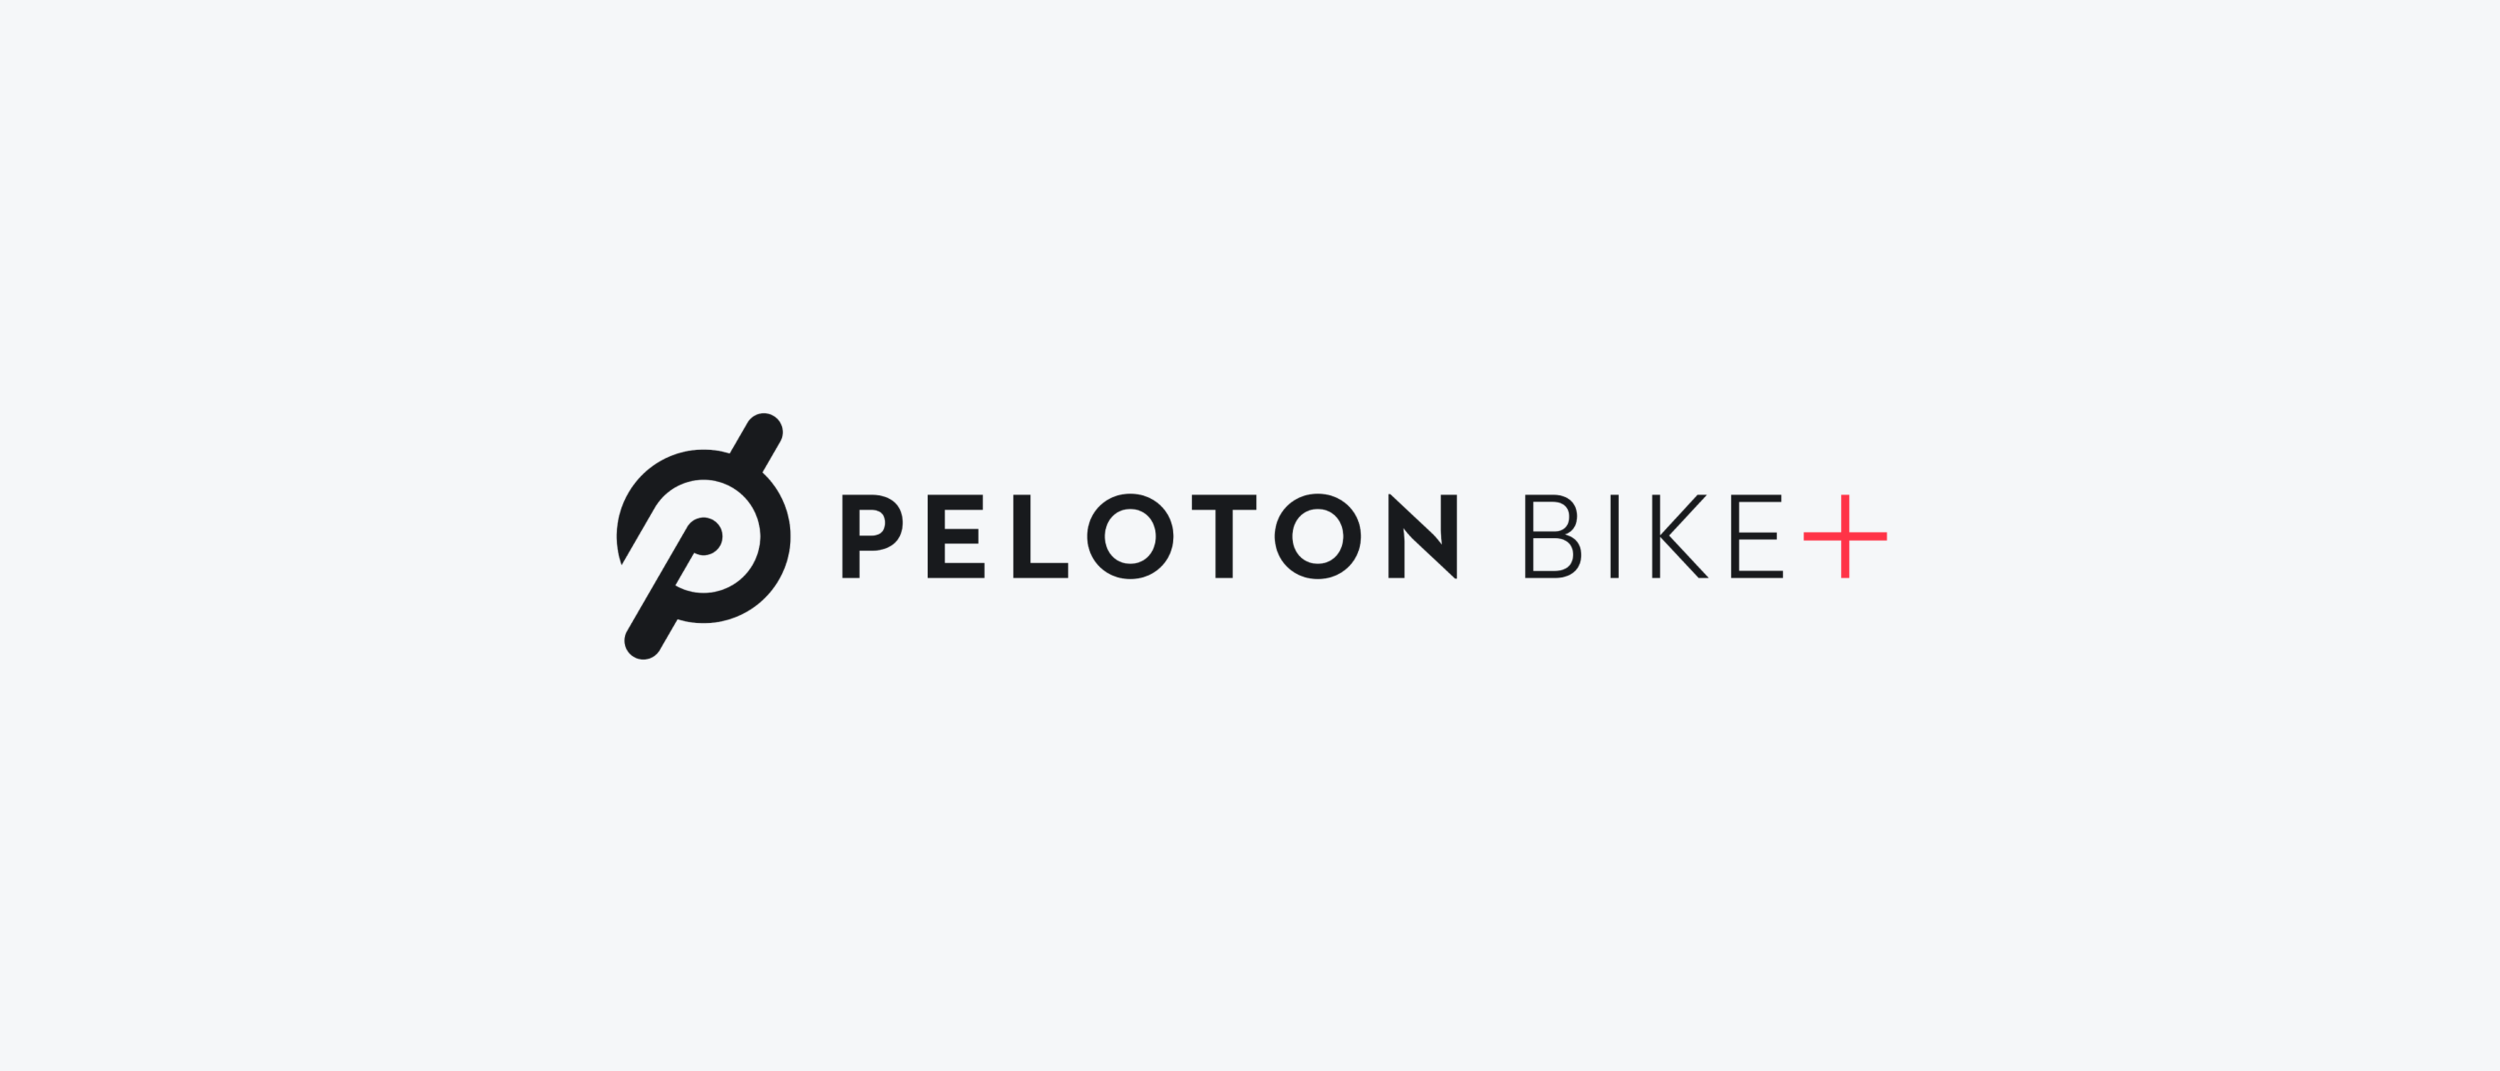 Oil and Gas Software Company - Oil and Gas Production Software | Peloton